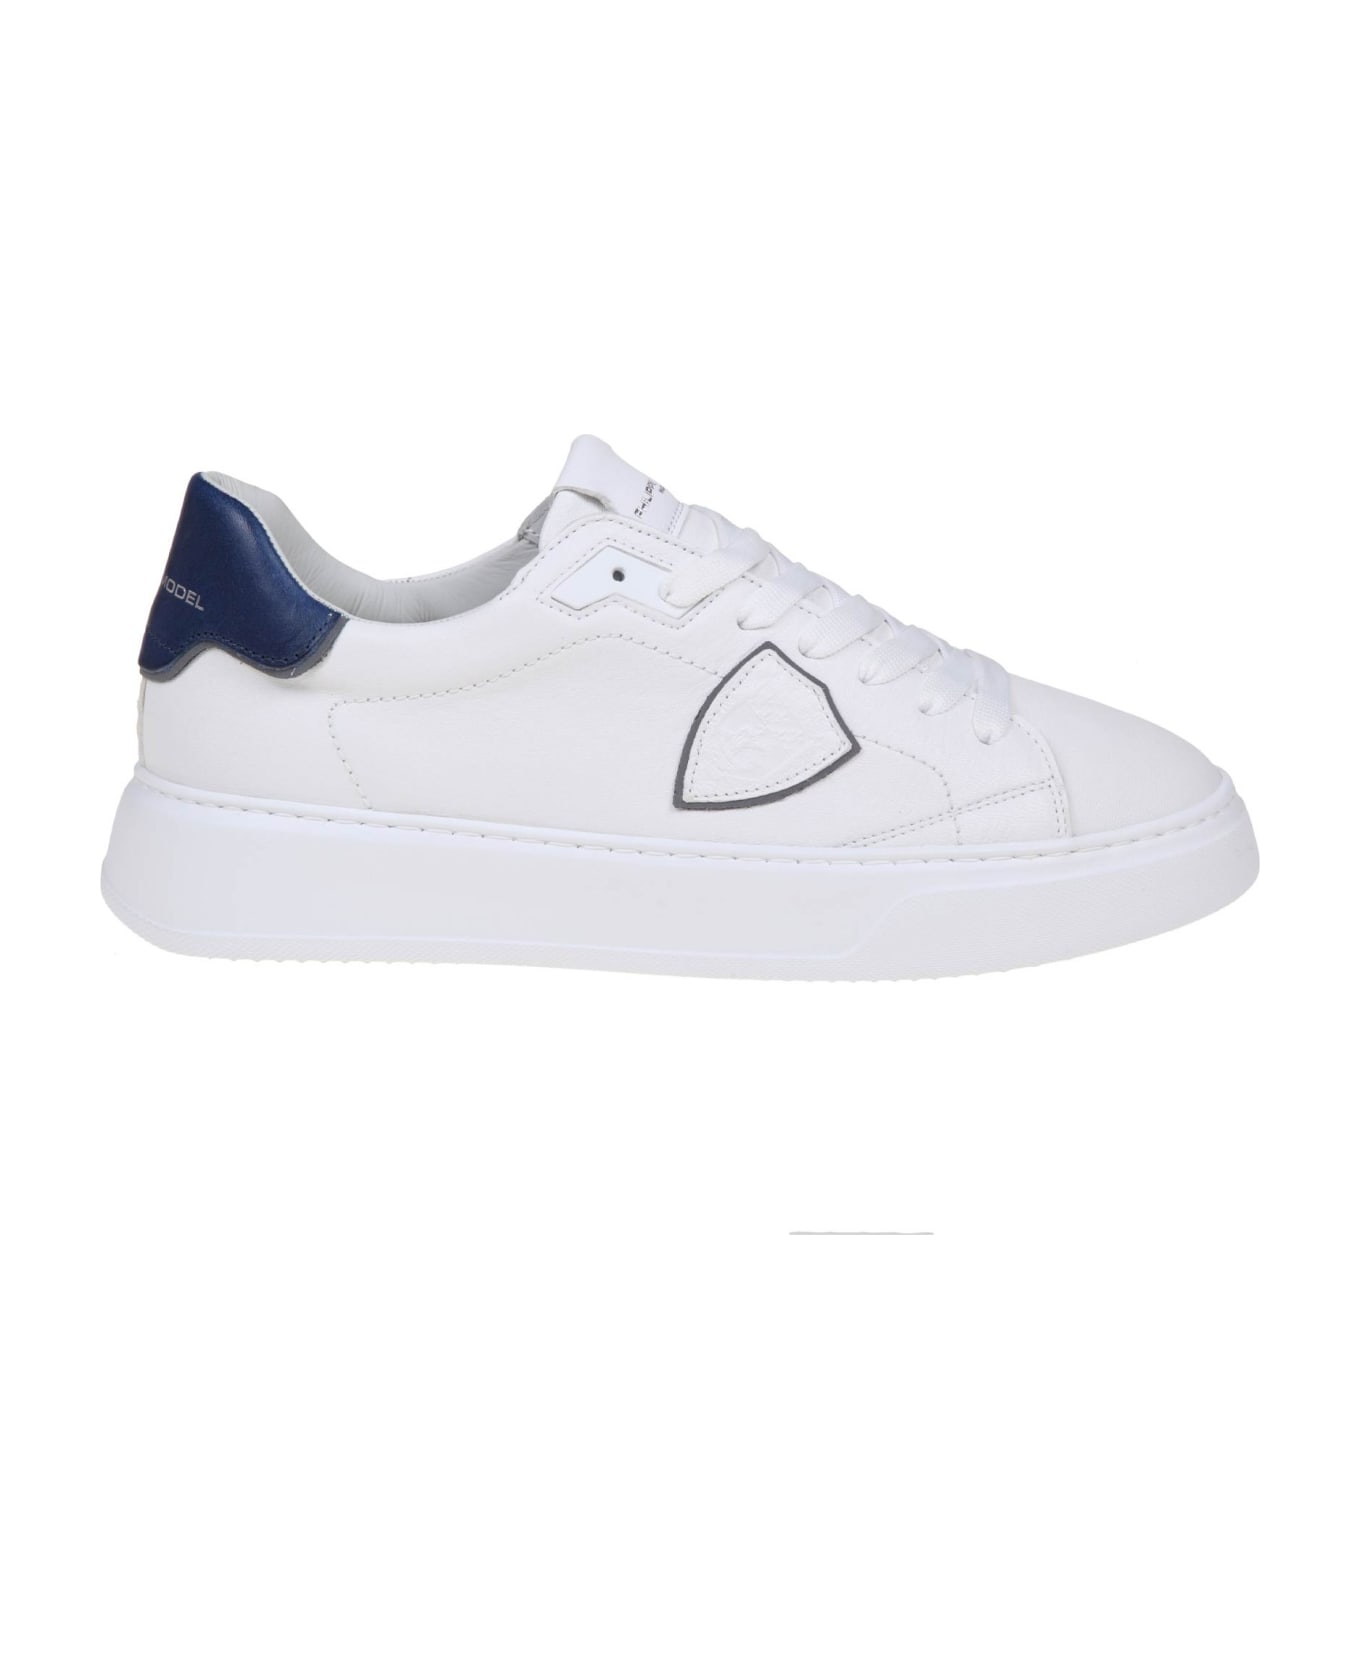 Philippe Model Temple Sneakers In White/blue Leather Philippe Model - WHITE